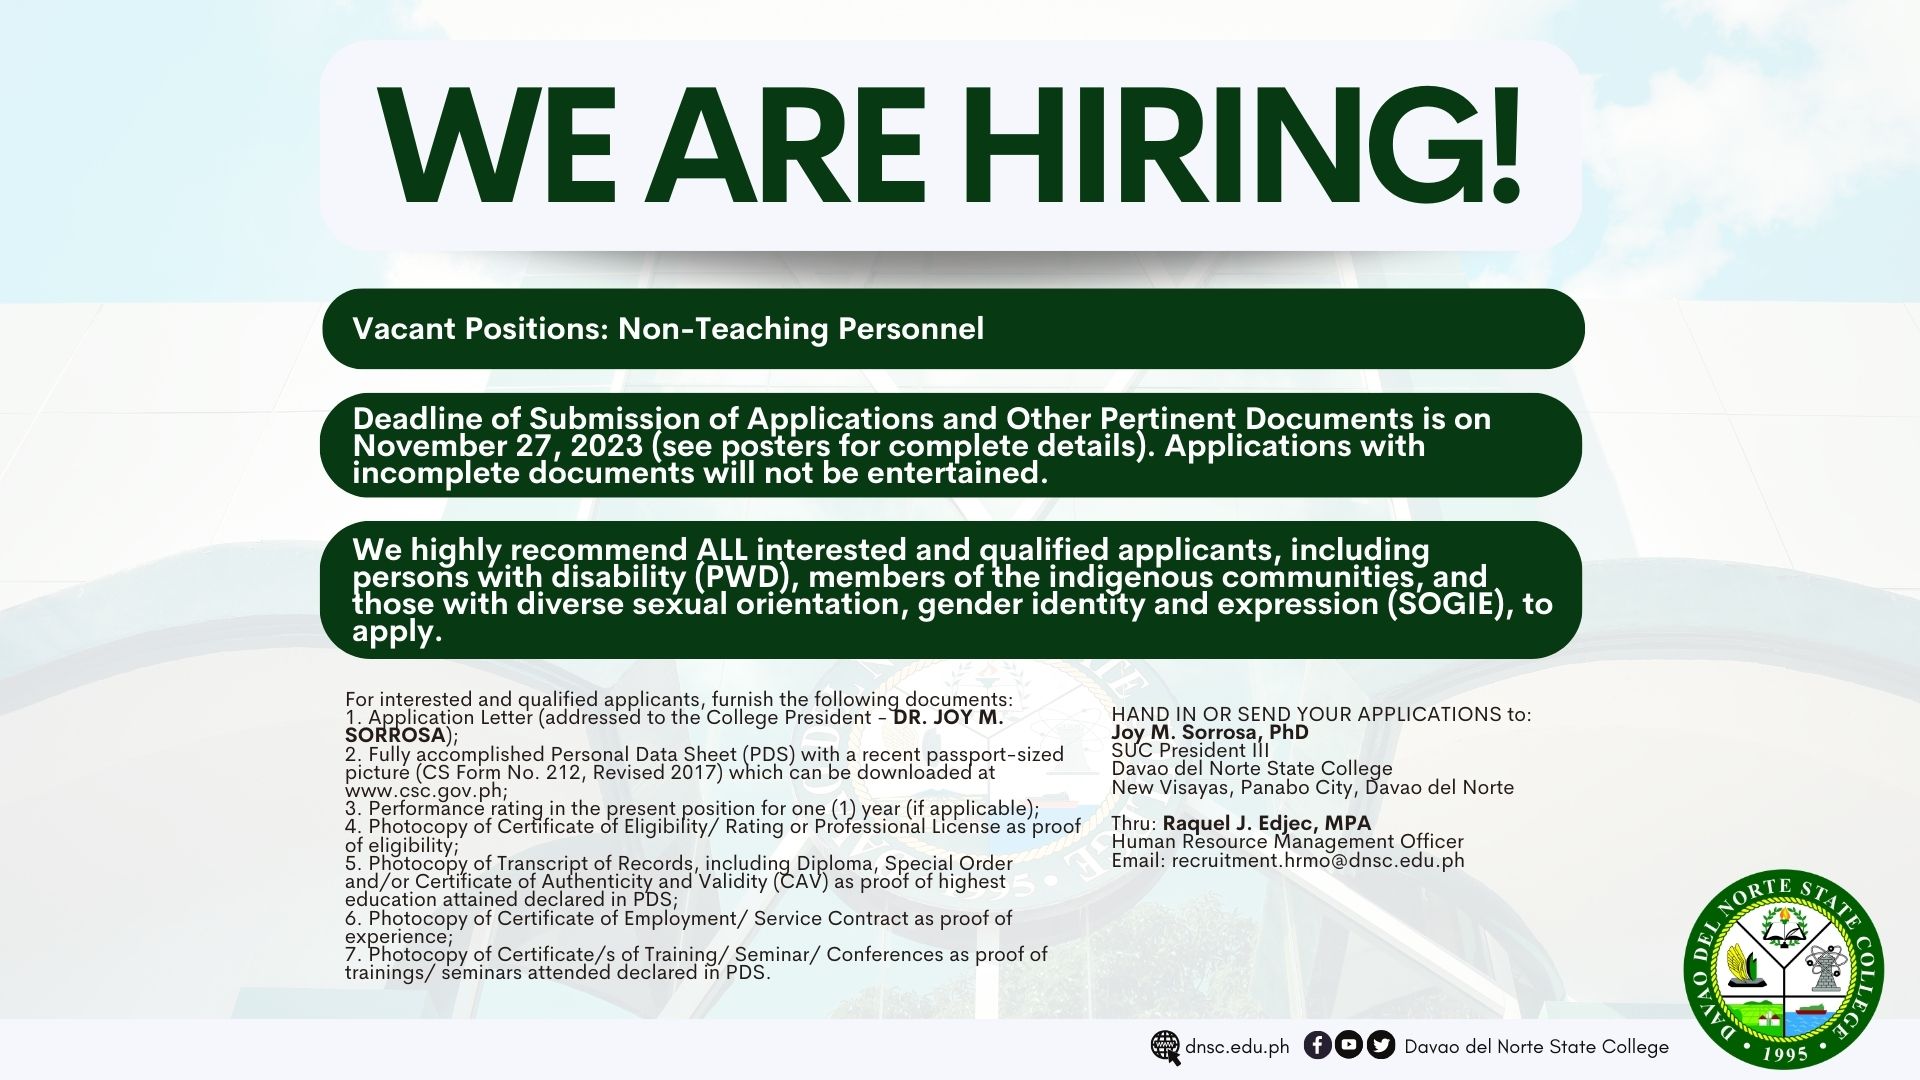 [HIRING] Non-teaching personnel. Hand in or email your applications ON OR BEFORE NOVEMBER 27, 2023.